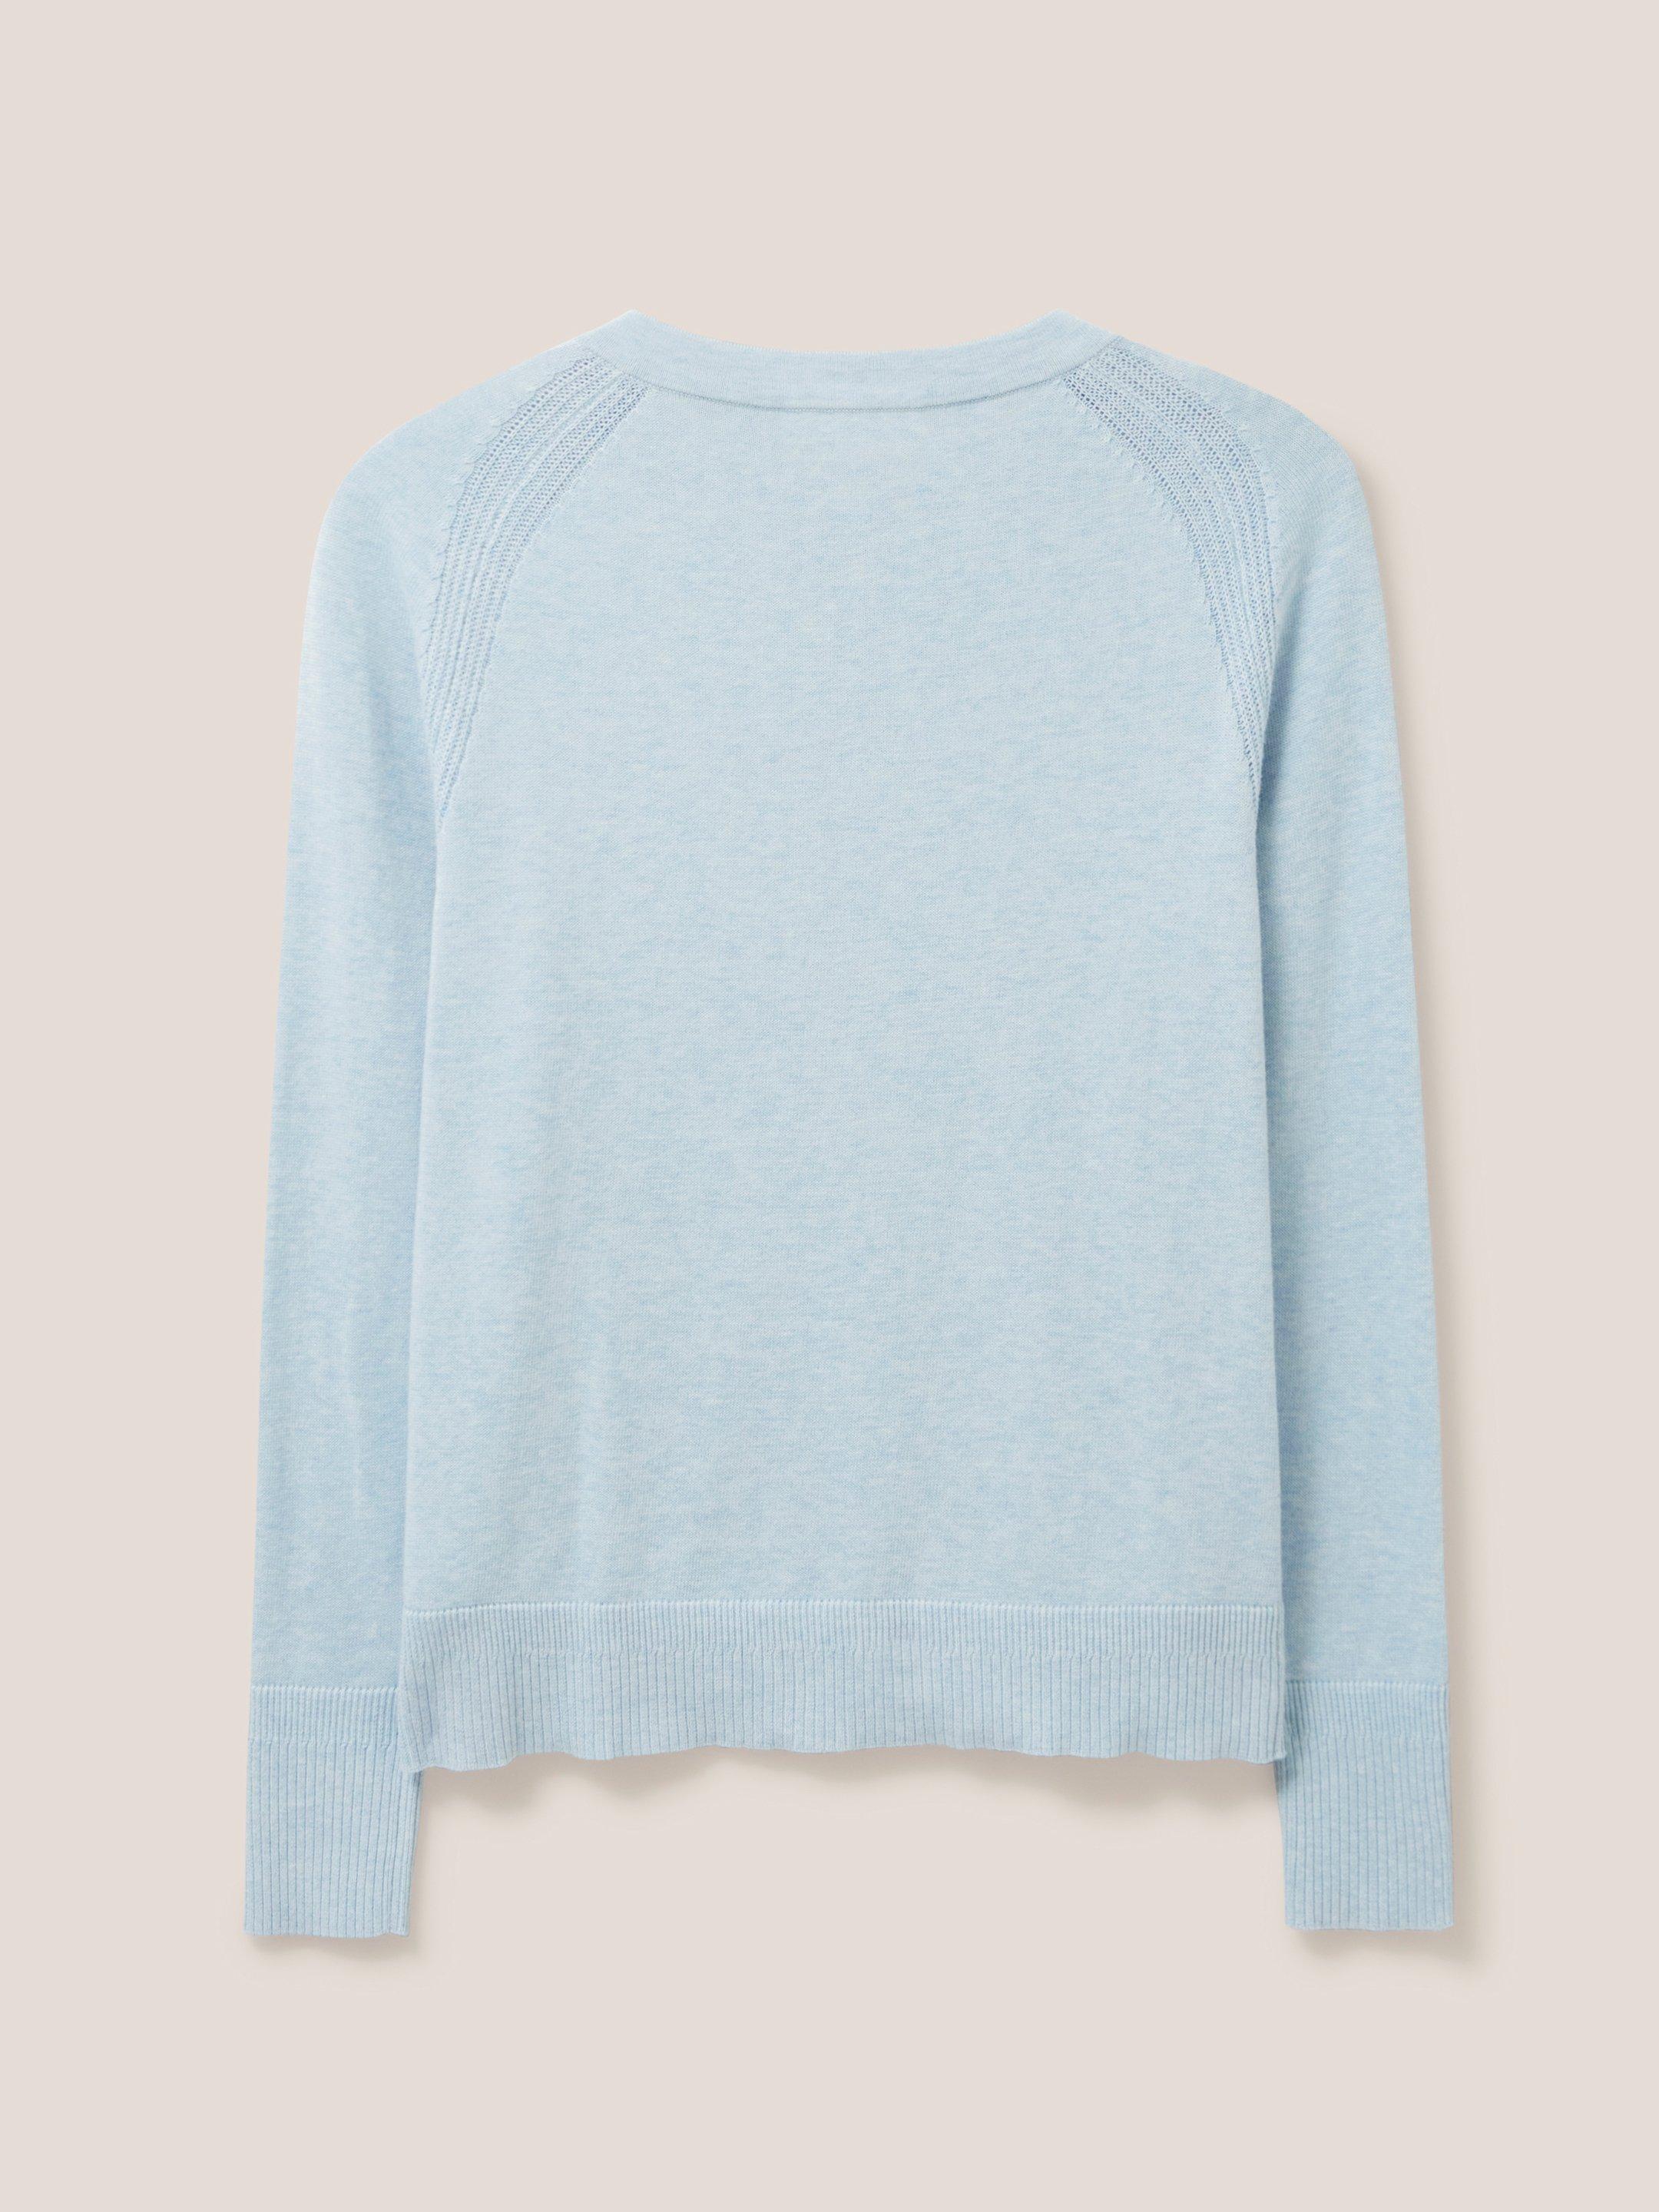 Lulu Knitted Crew Neck Cardigan in LGT BLUE - FLAT BACK